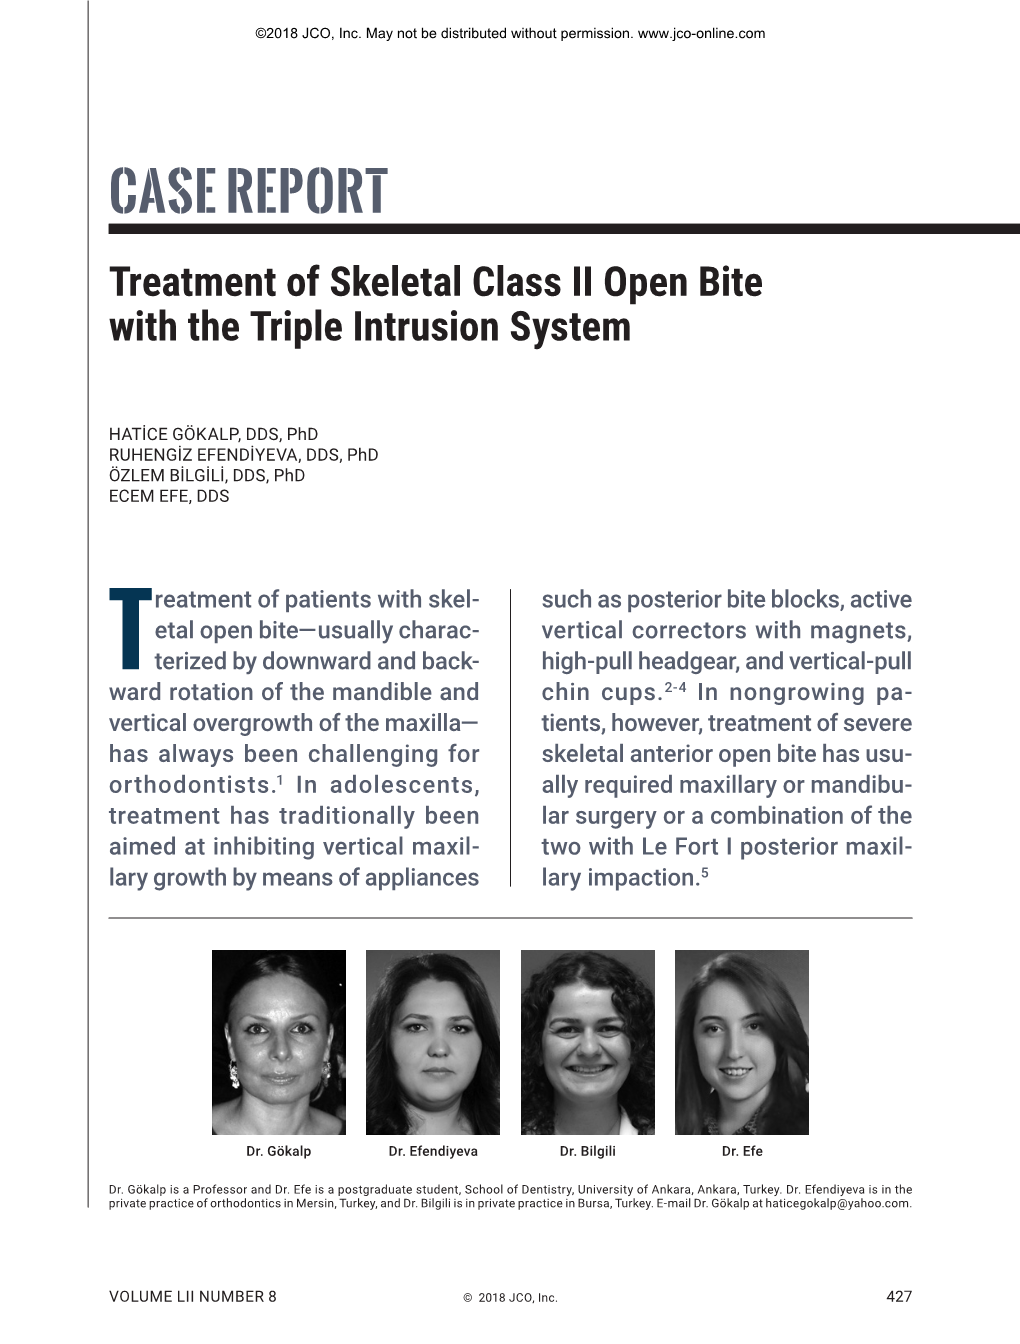 CASE REPORT Treatment of Skeletal Class II Open Bite with the Triple Intrusion System